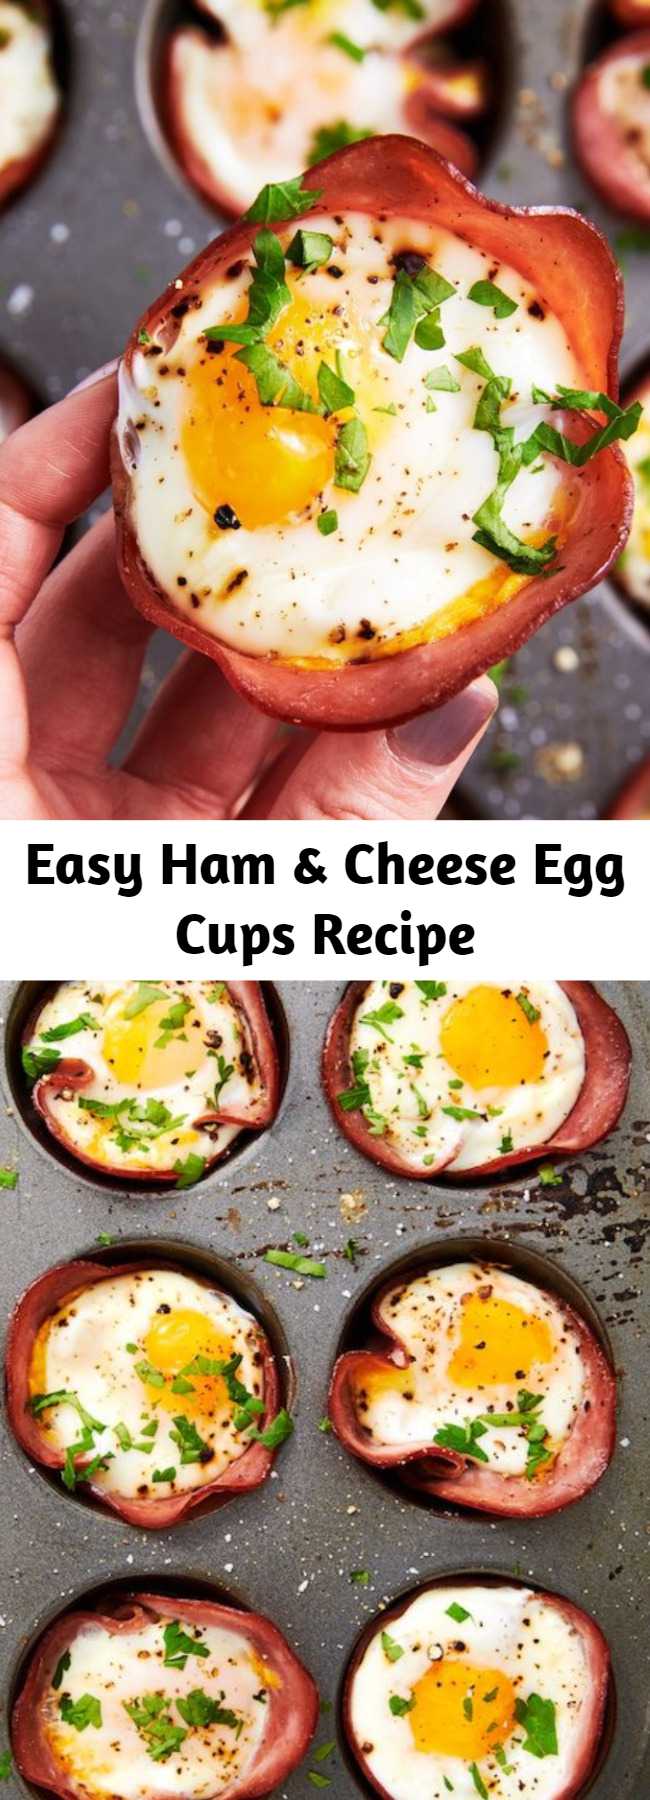 Easy Ham & Cheese Egg Cups Recipe - This low-carb breakfast comes together in no time. Seriously, you only need 20 minutes! Perfect as a light savoury snack, keto breakfast or lunch or a portable picnic recipe idea, everyone will love these little egg cups.